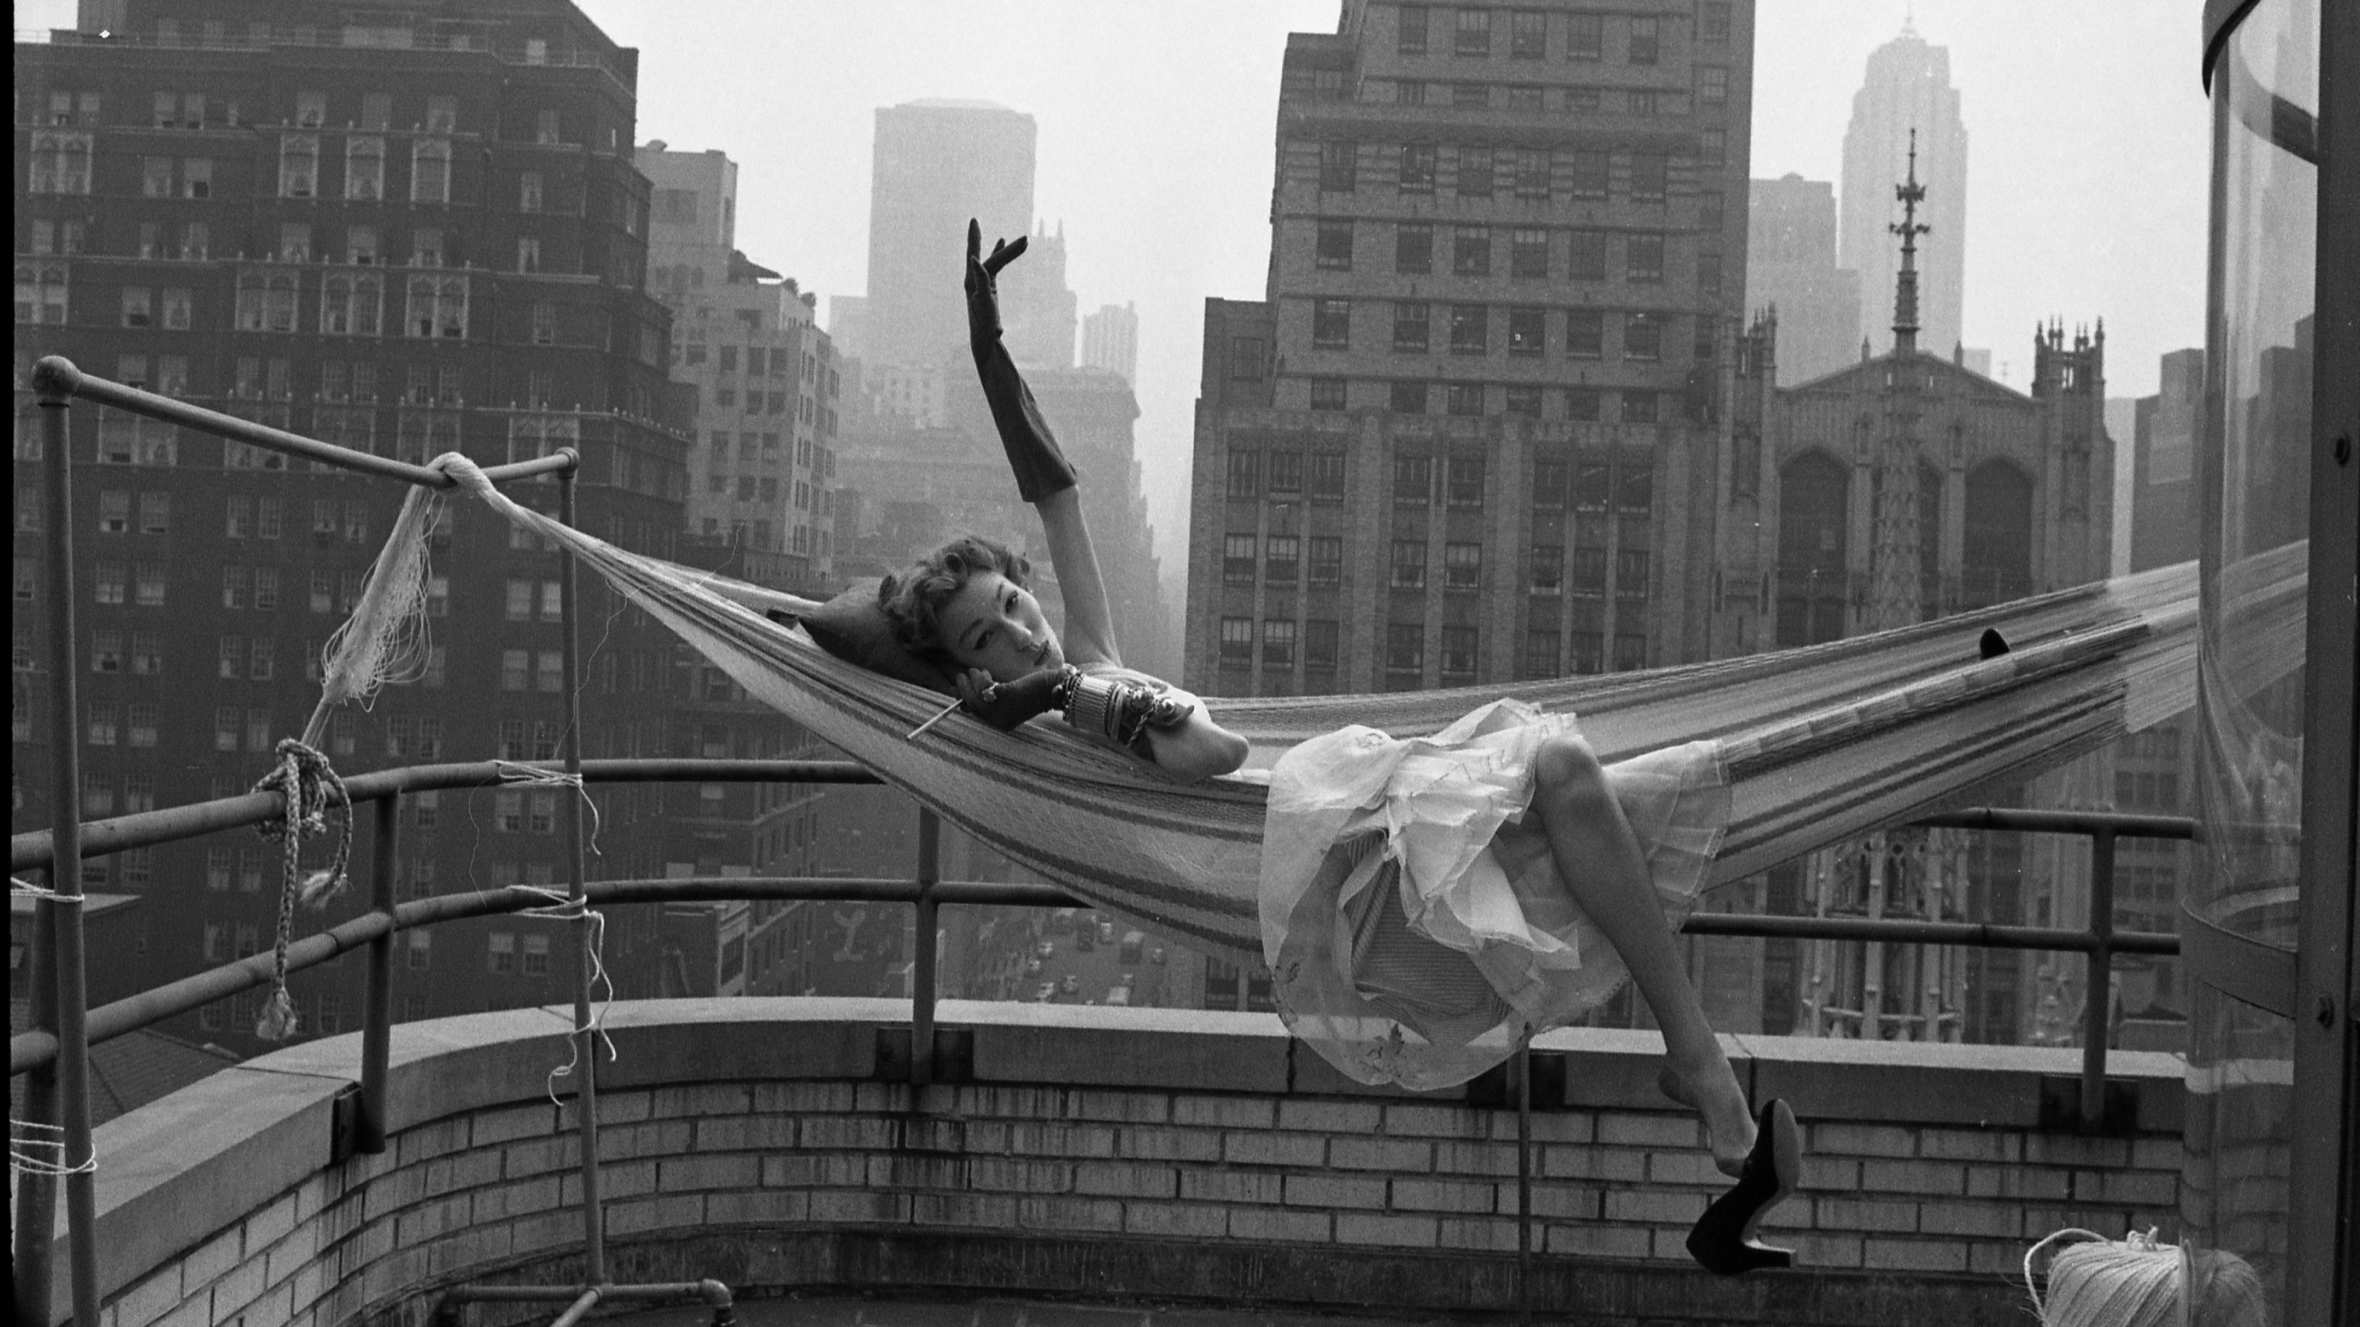 A glamorously dressed woman lies languidly in a hammock on the rooftop of a building surrounded by skyscrapers